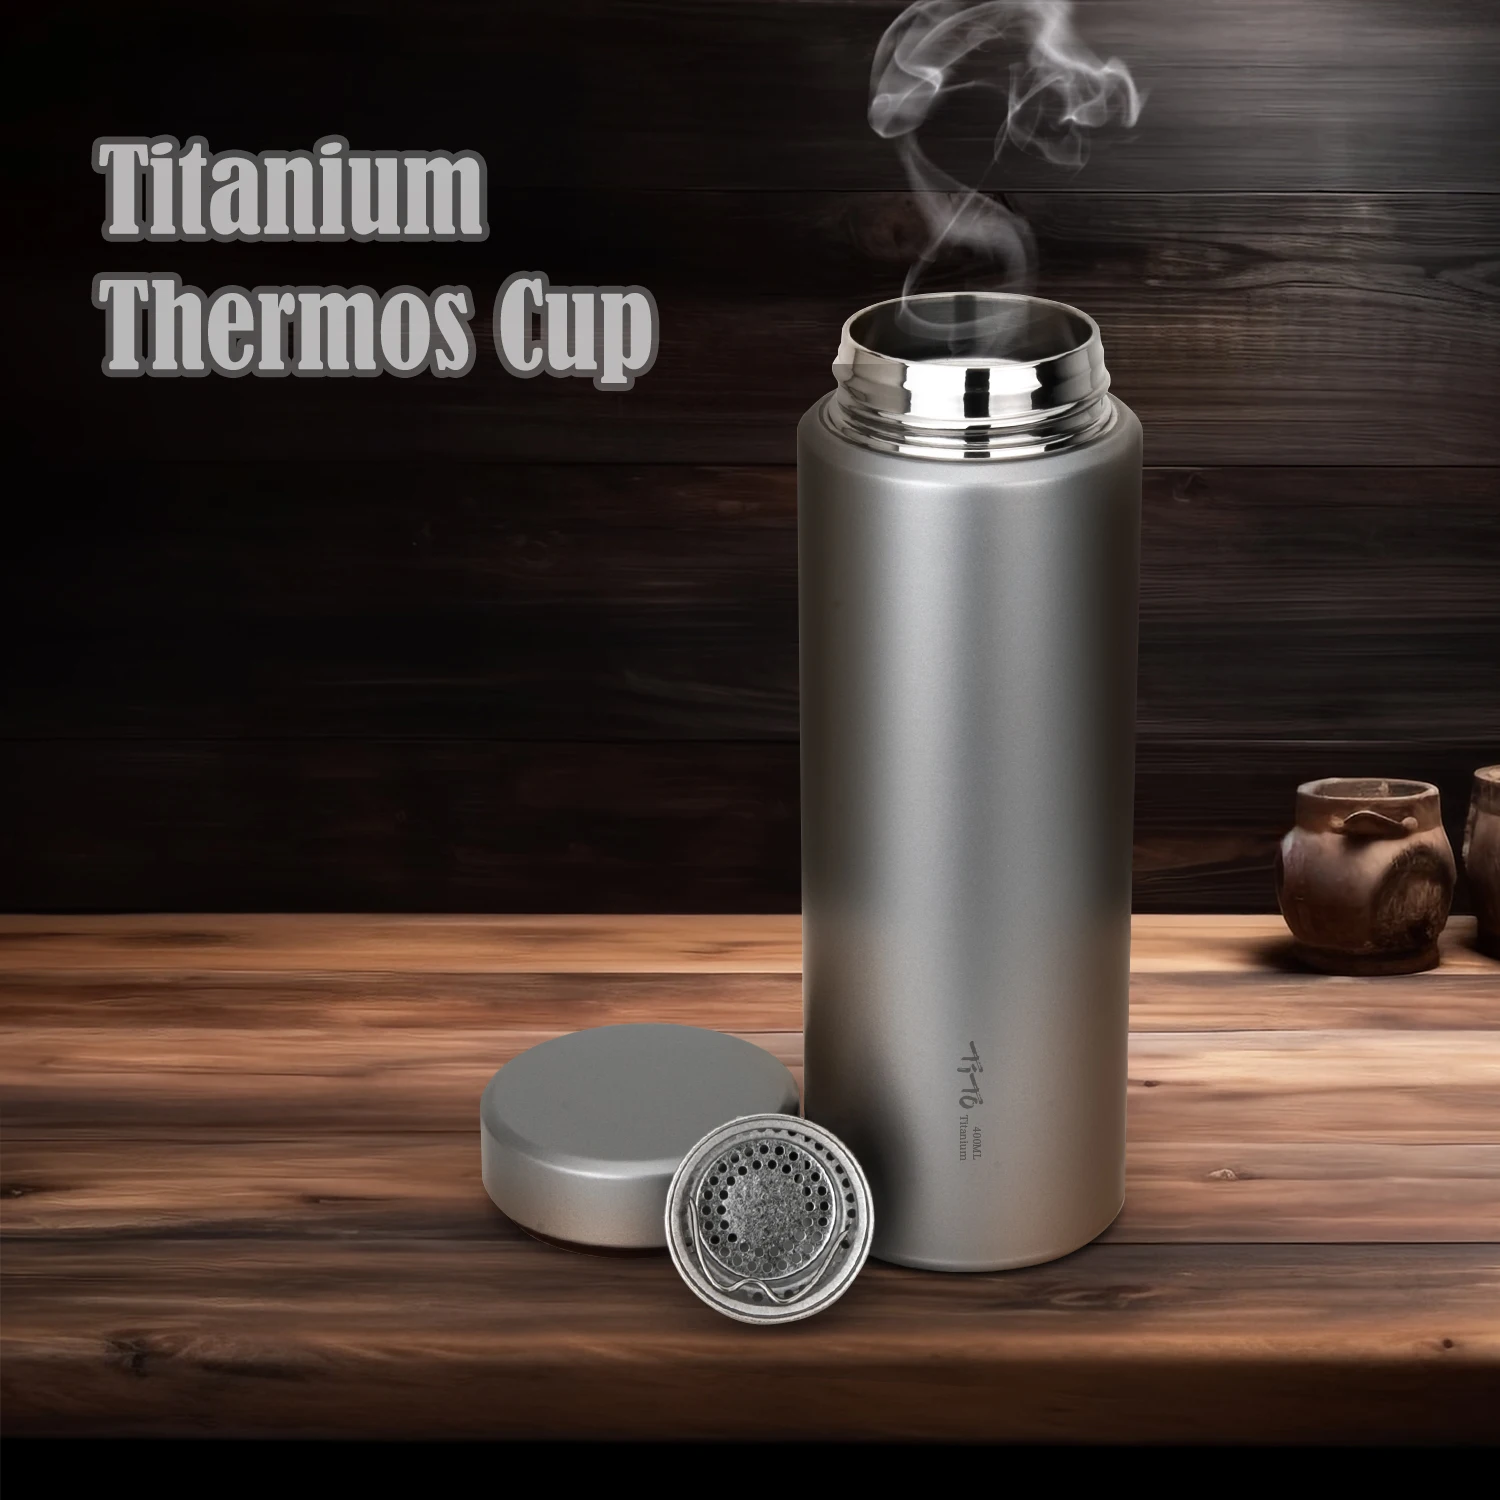 TiTo 400ml Thermos Cup Bottle Water Coffee Mug Sandblasted Titanium Hydroflask Portable Vacuum Business Flasks & Thermoses